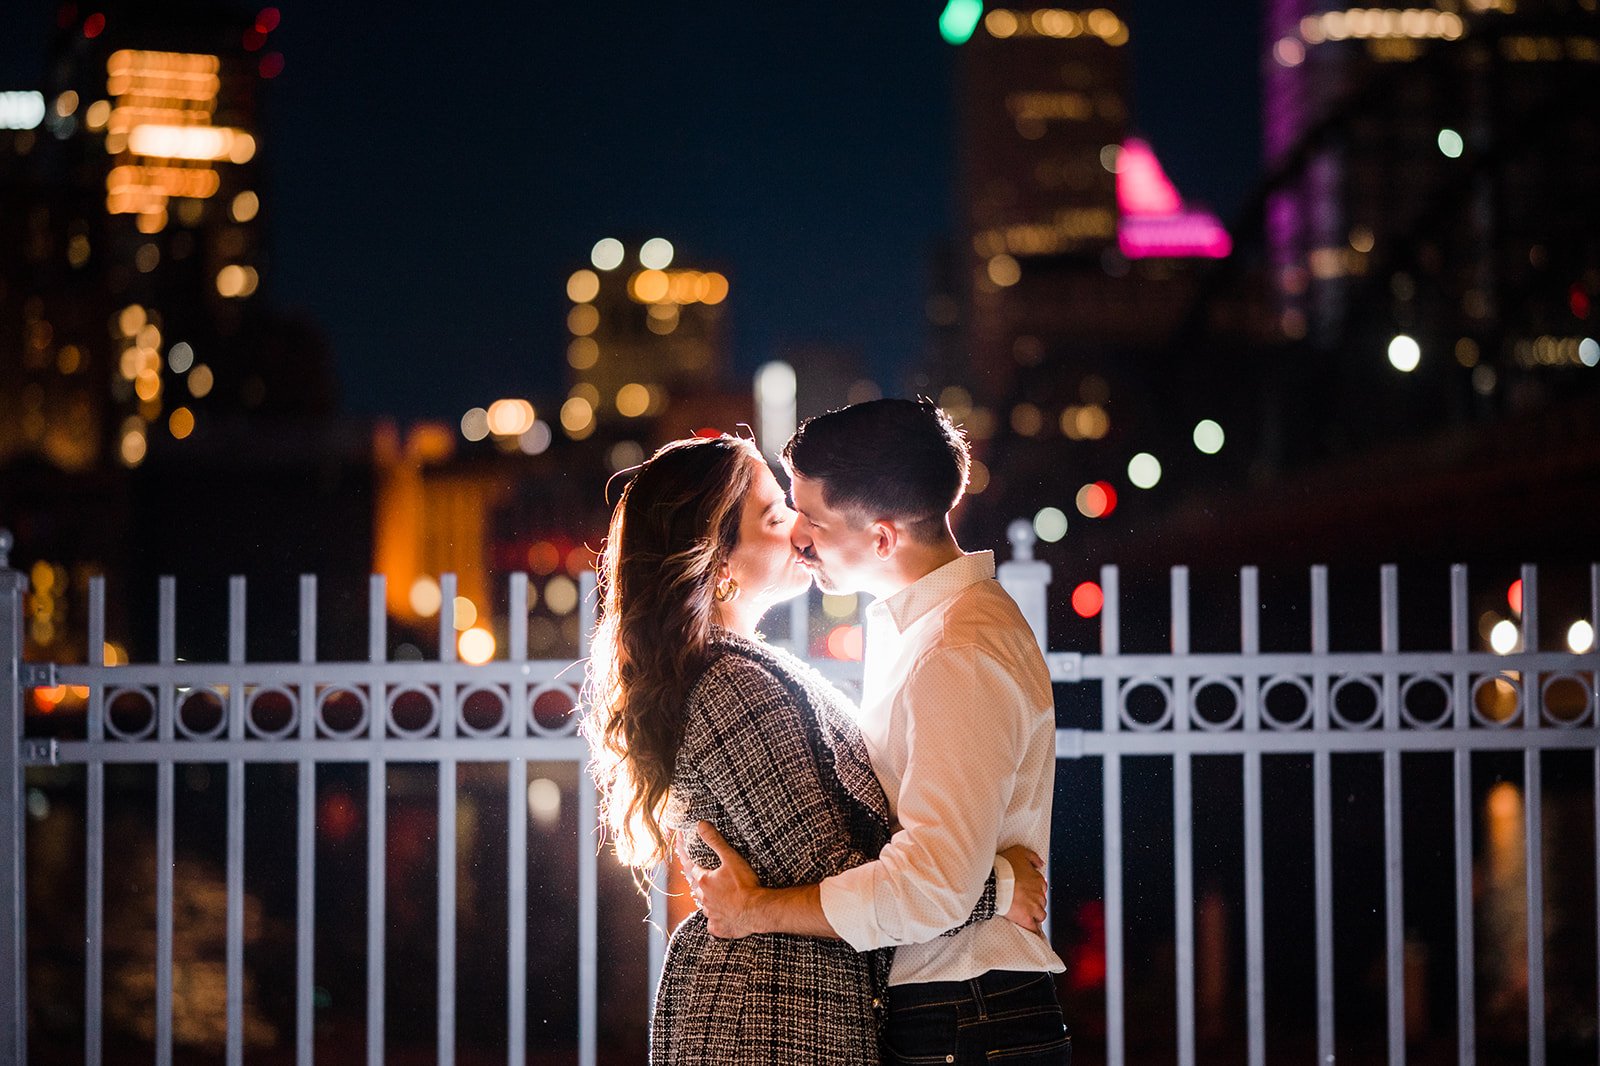 downtown pittsburgh engagement session